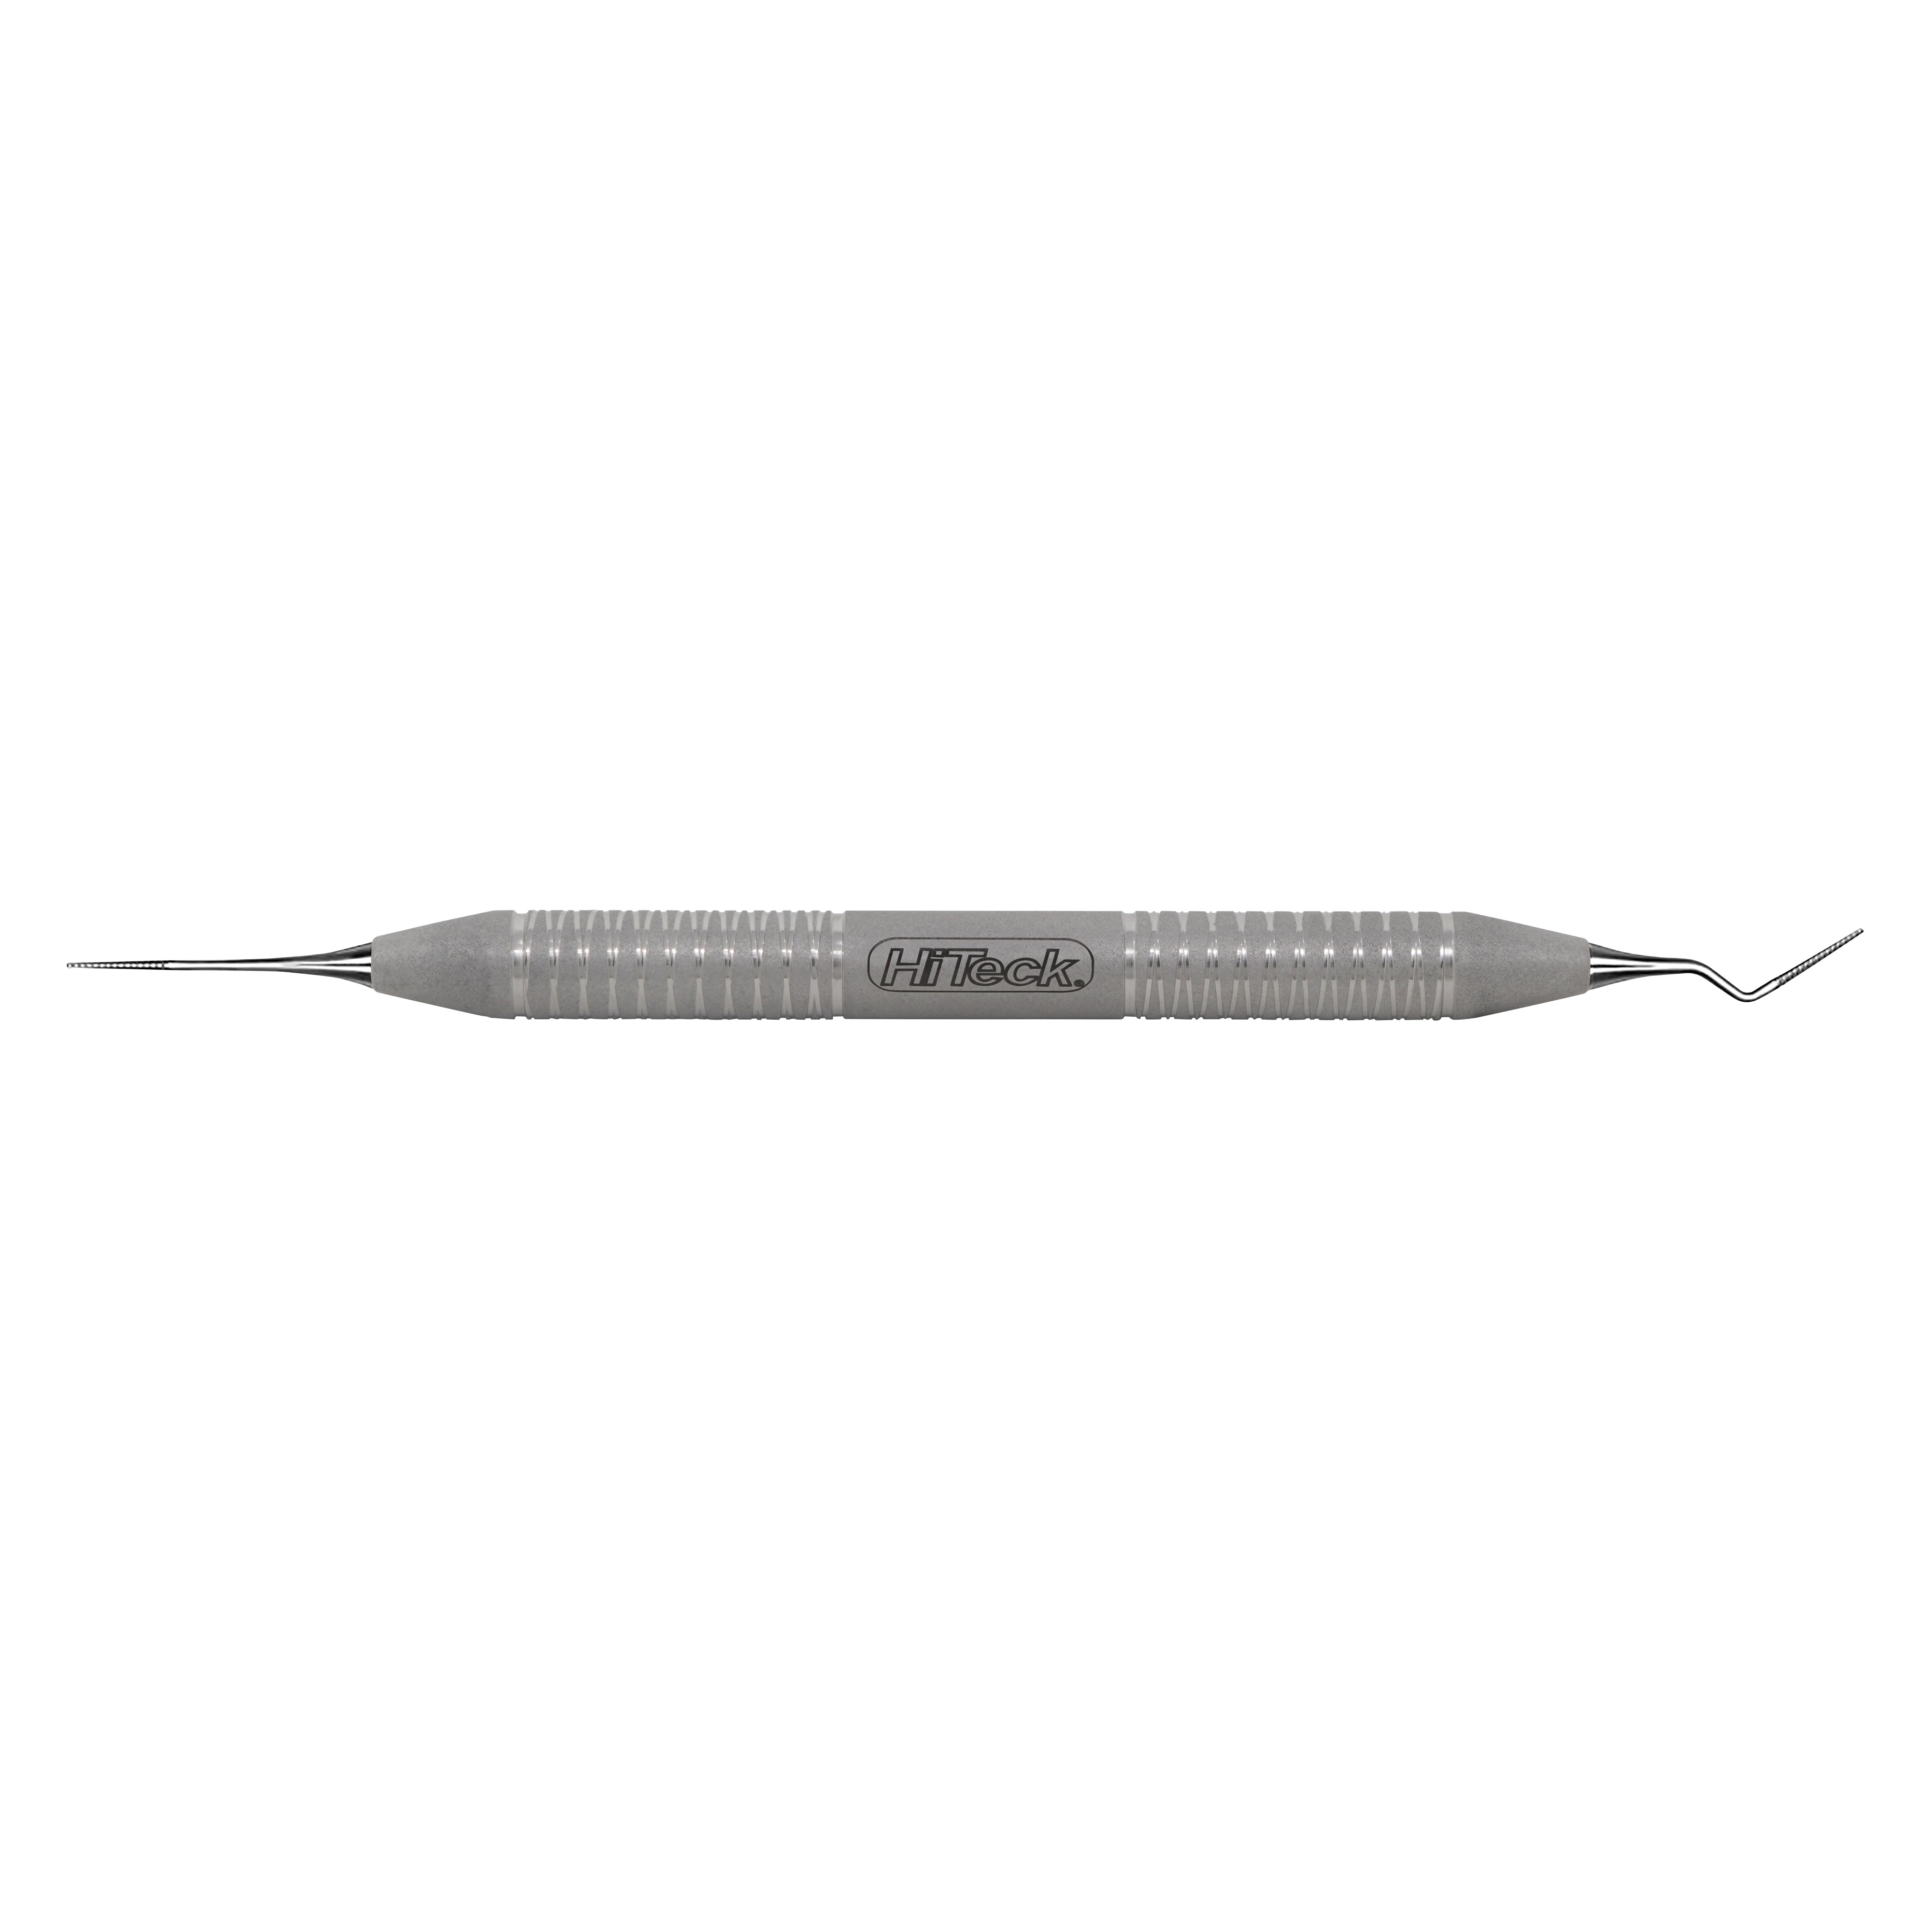 11/12 Buck Straight File Periodontal File - HiTeck Medical Instruments